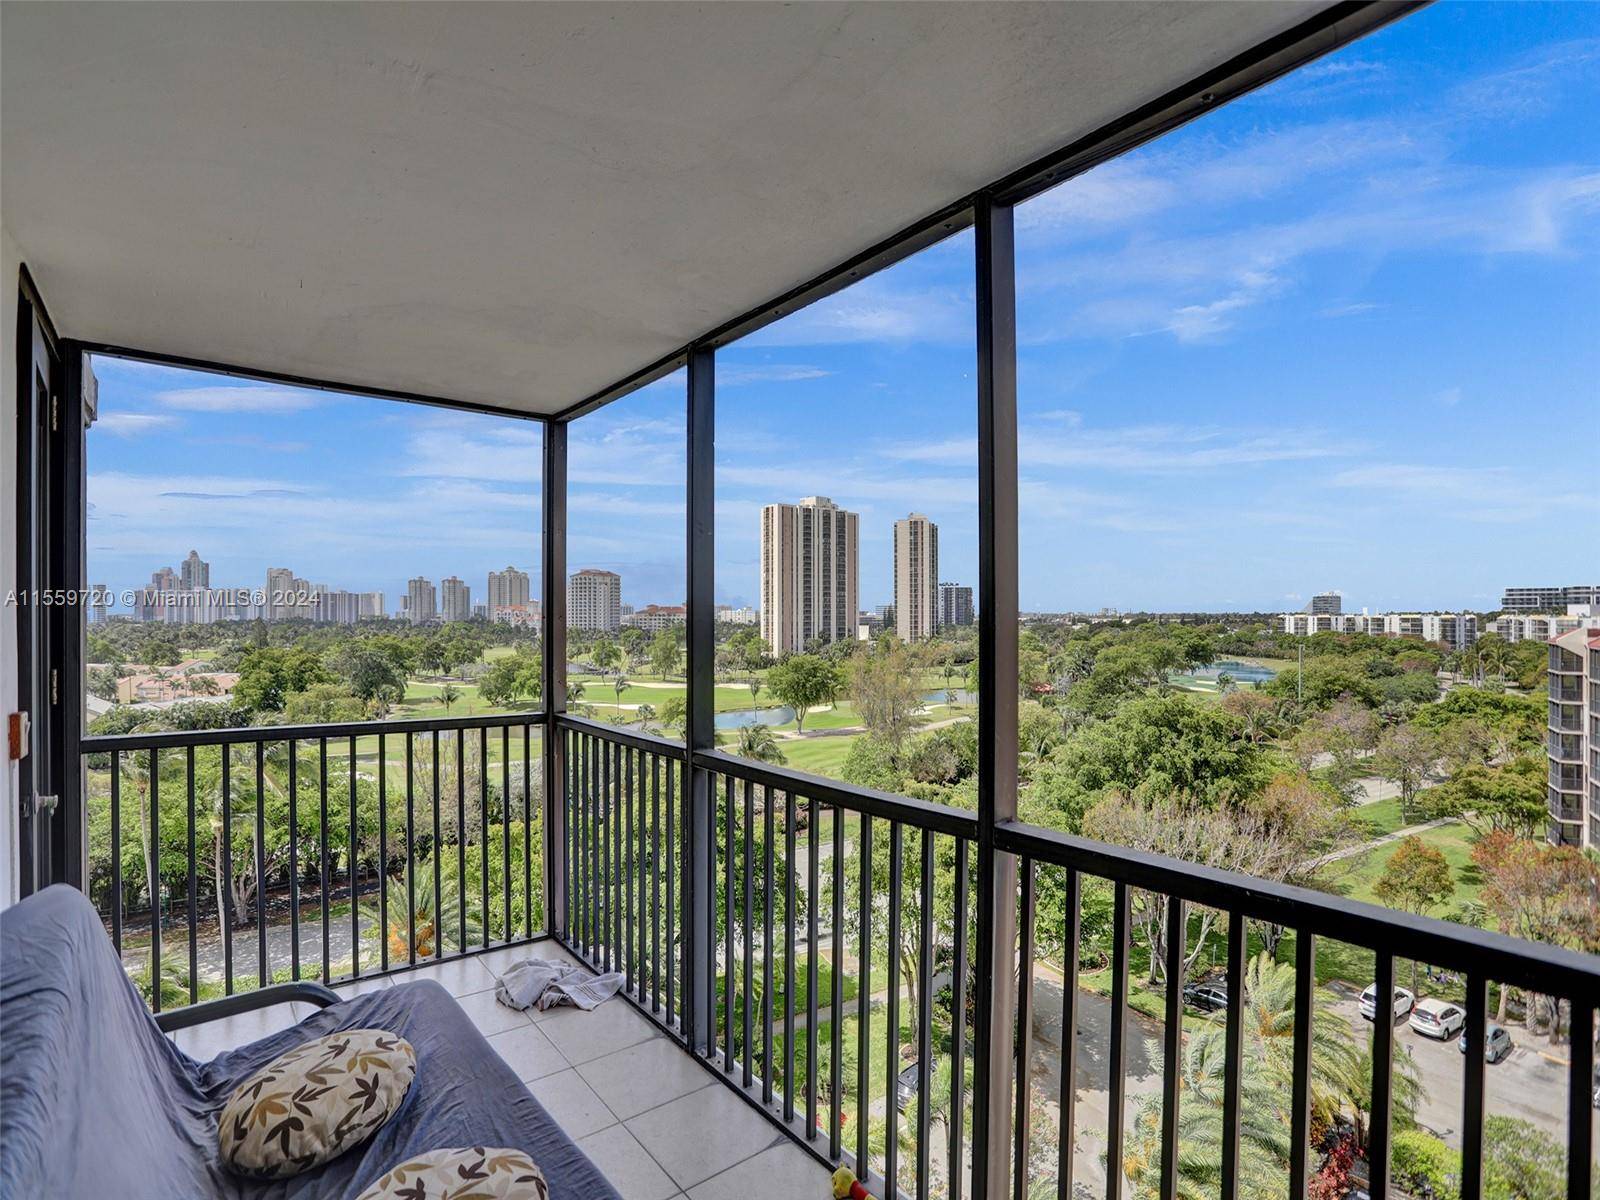 Breathtaking views of the Turnberry golf course and the 3 mile 'circle' of Aventura.